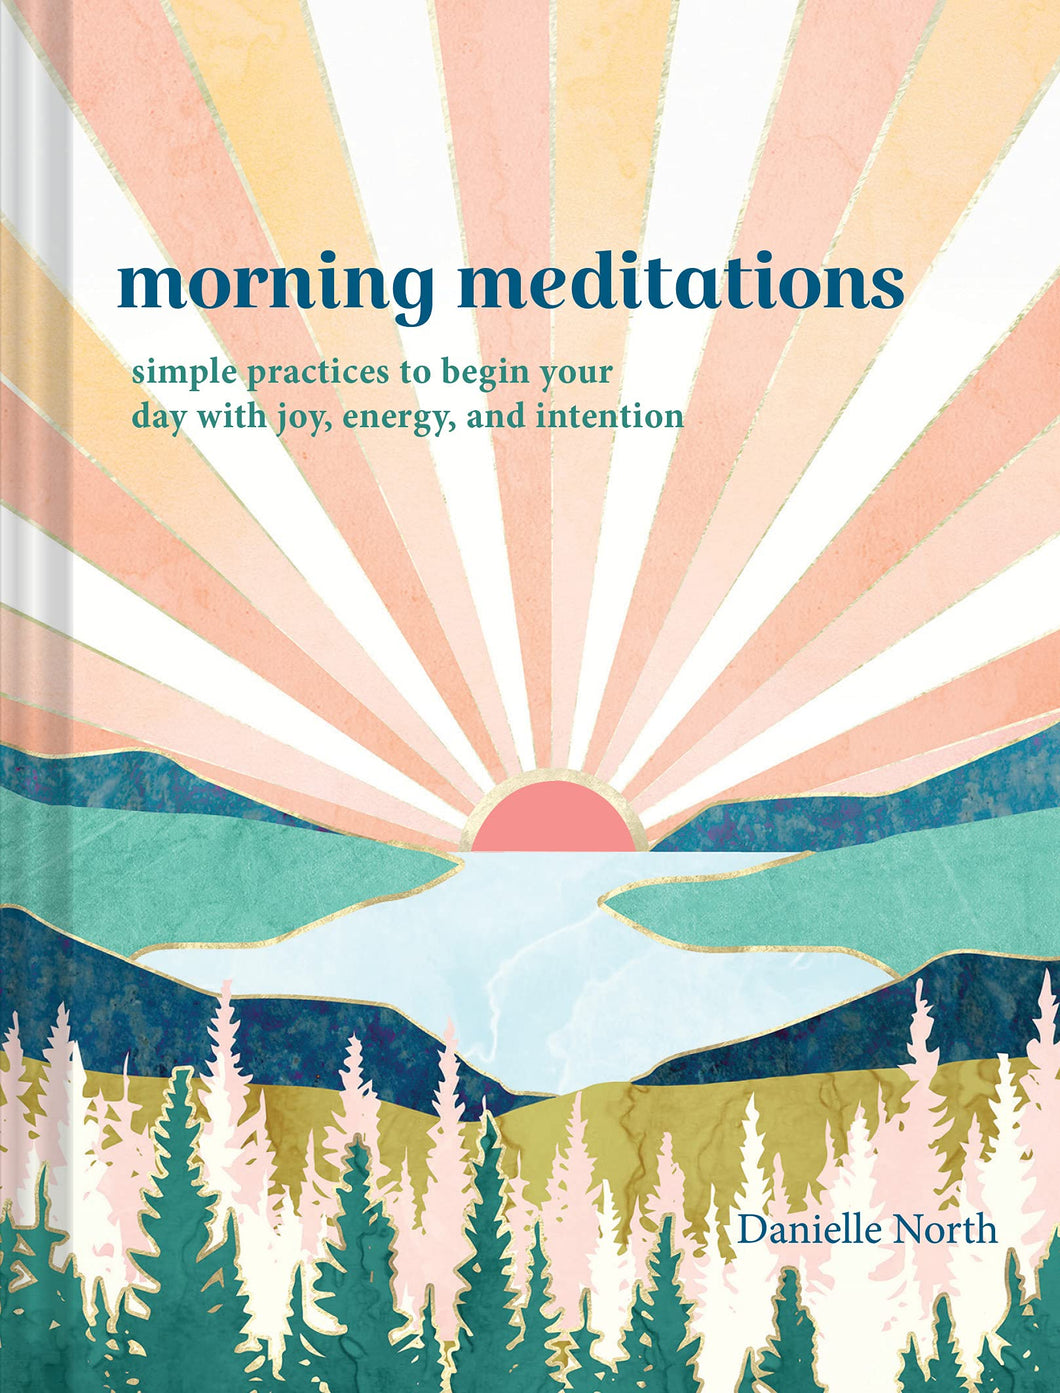 Morning Meditations: Simple Practices To Begin Your Day With Joy, Energy, And Intention [Vesna Asanovic]